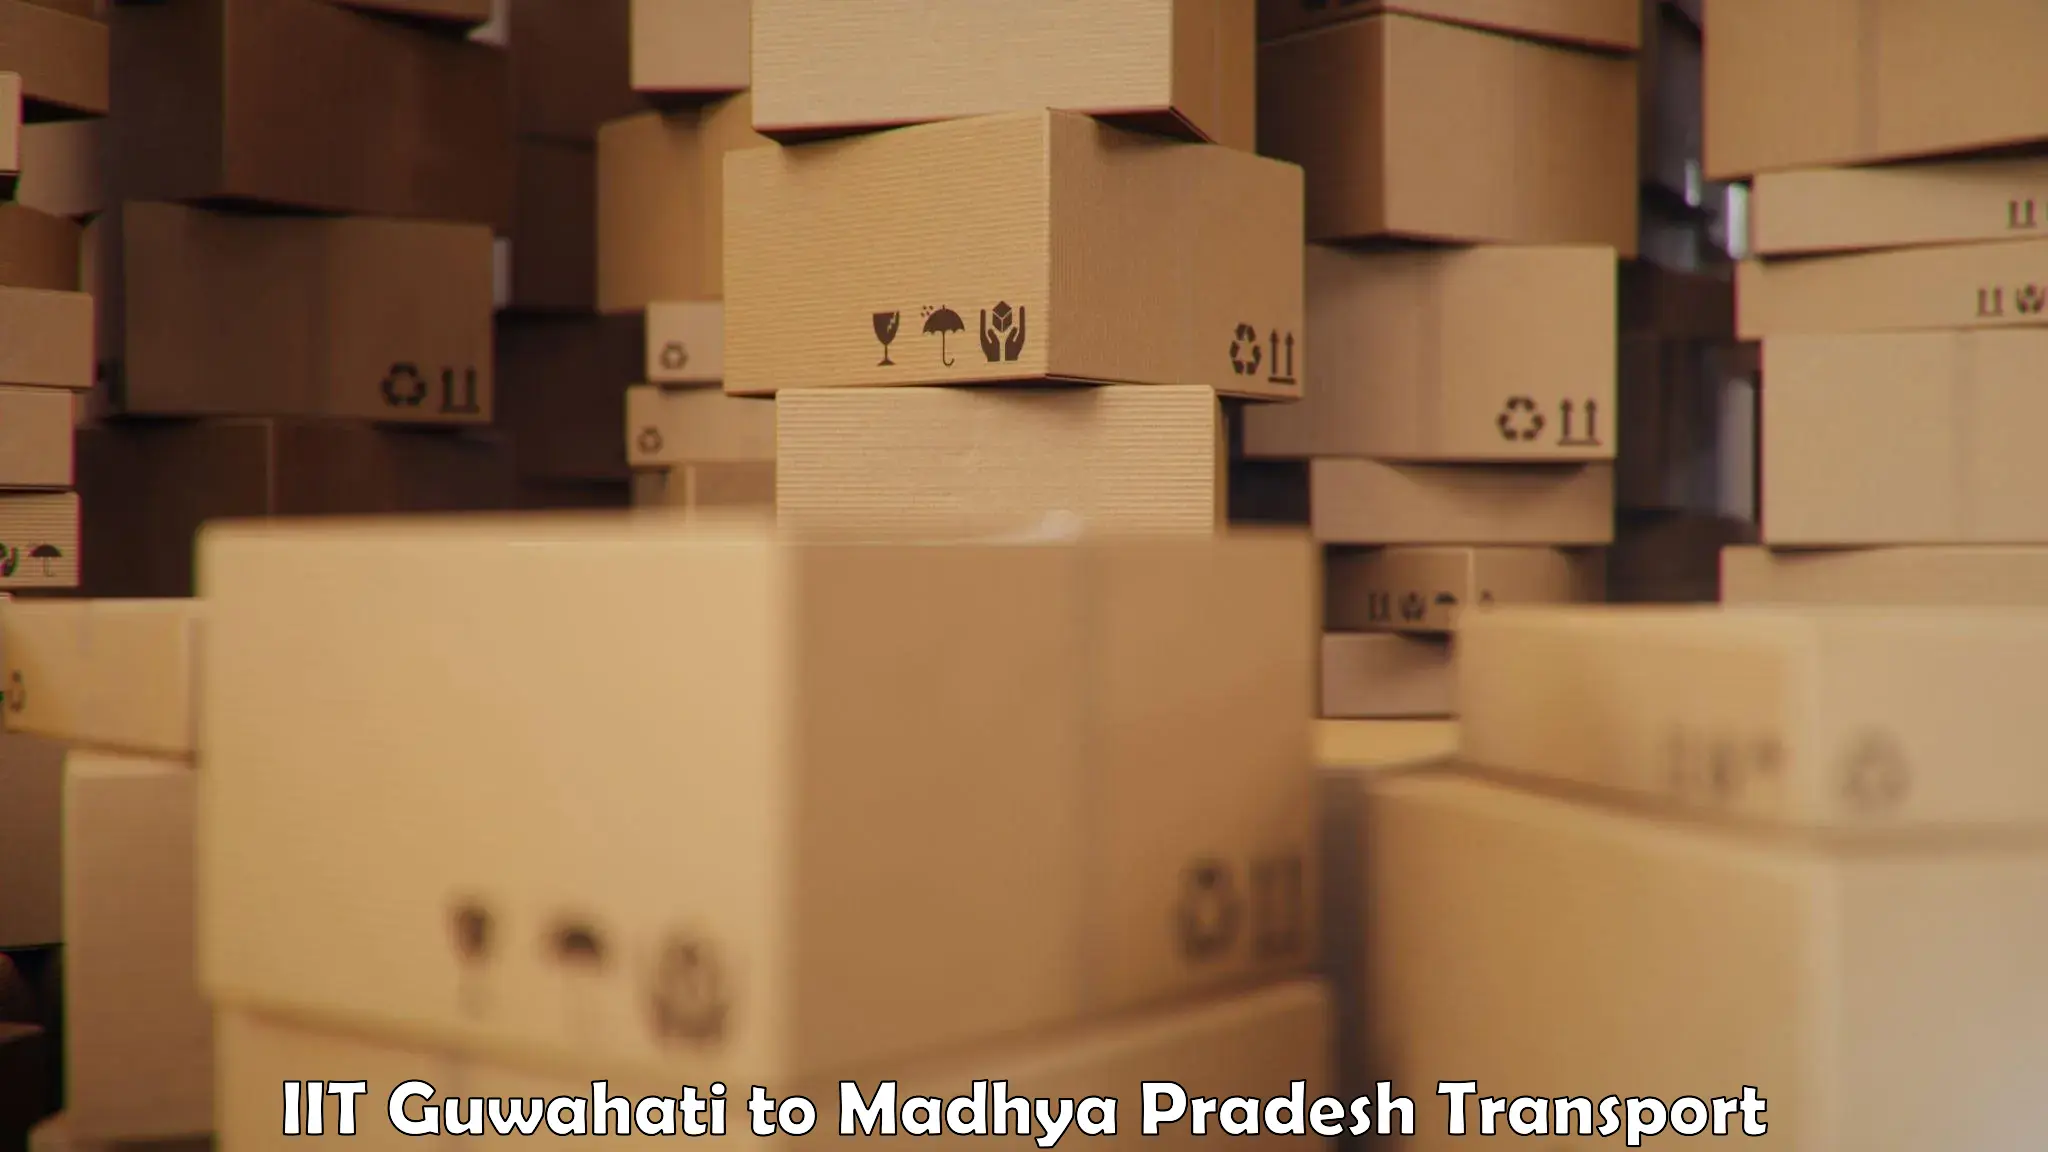 Luggage transport services IIT Guwahati to Dhar